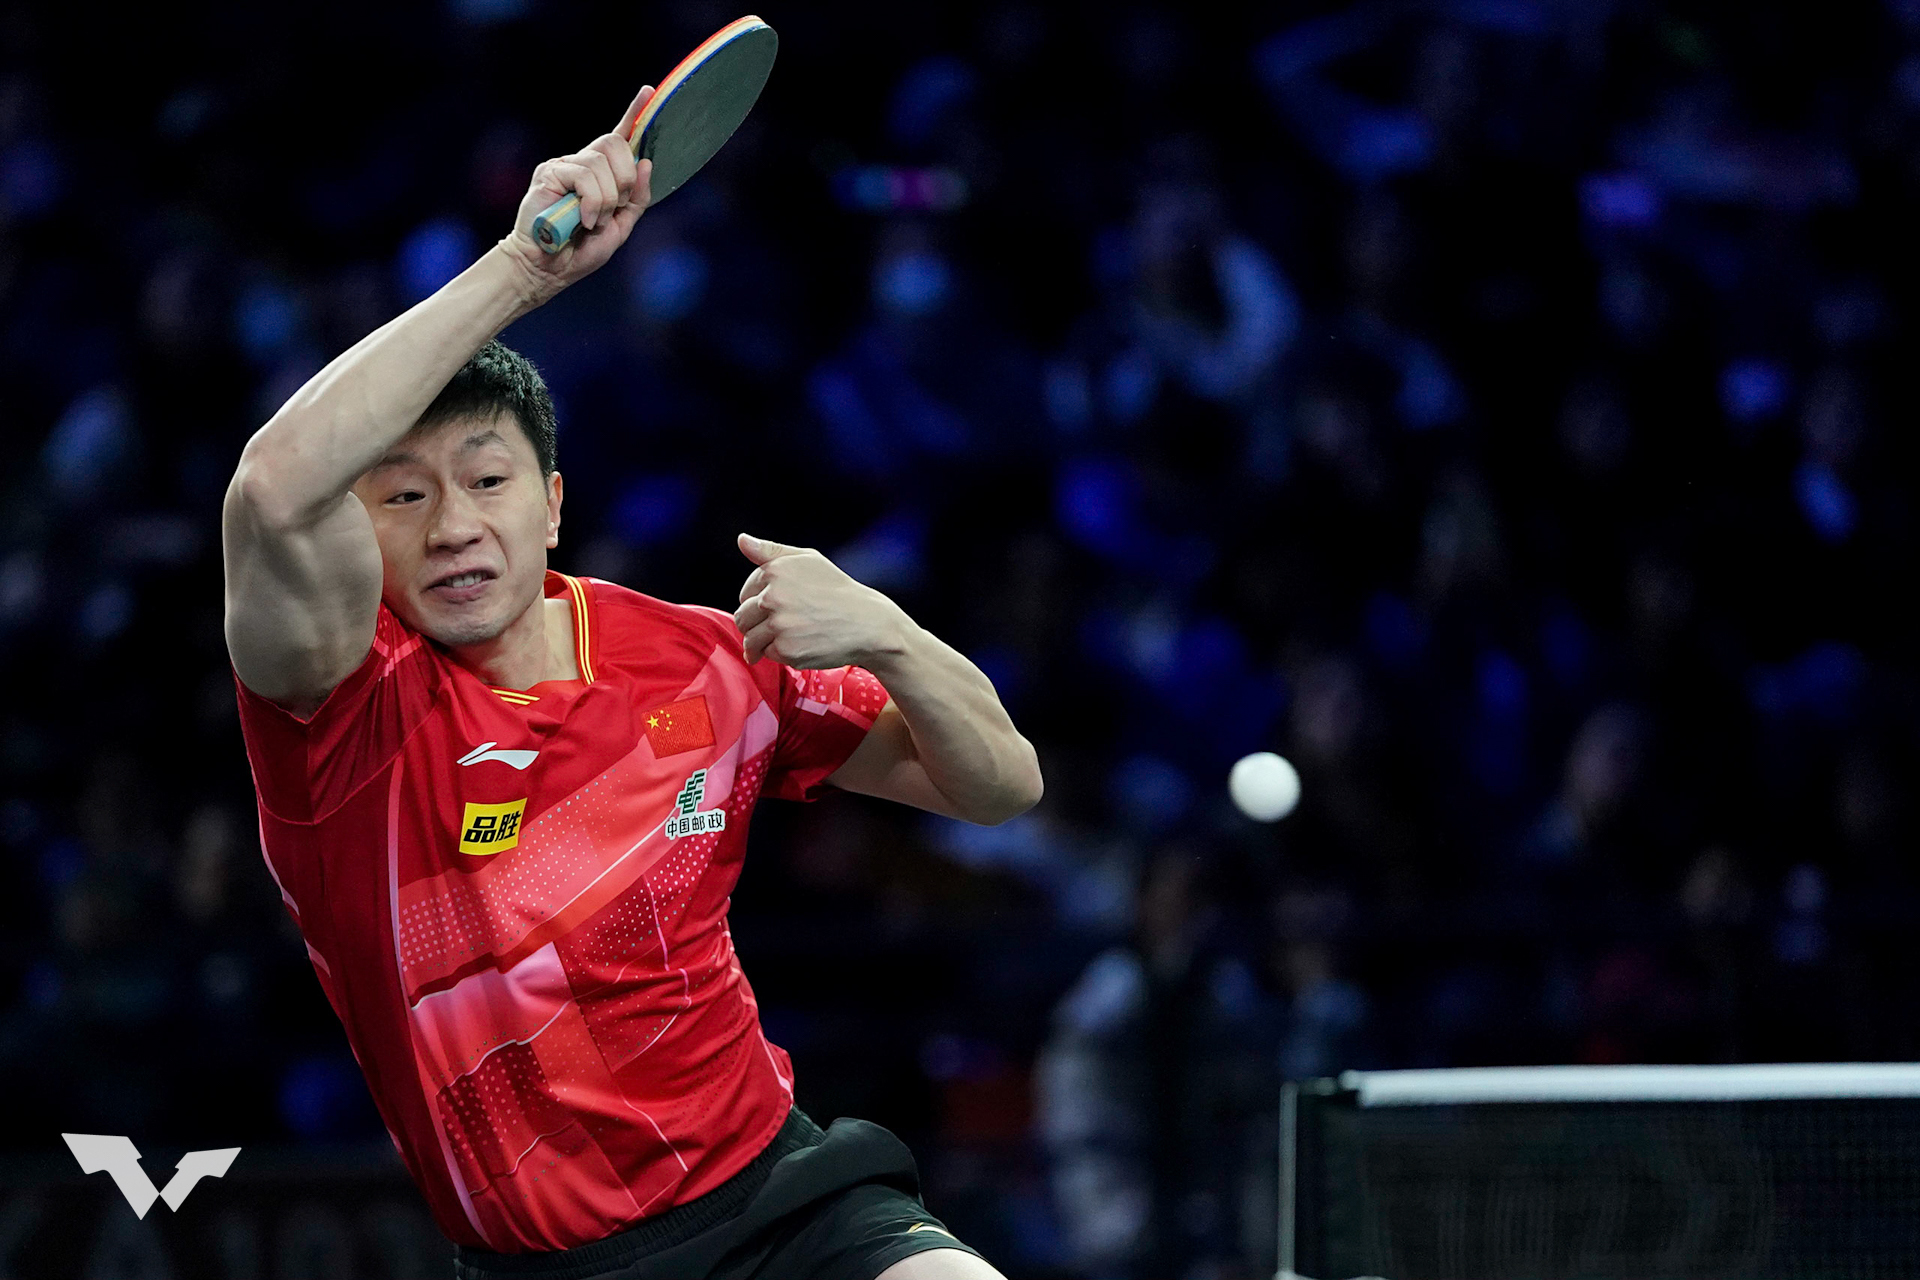 table tennis live streaming free